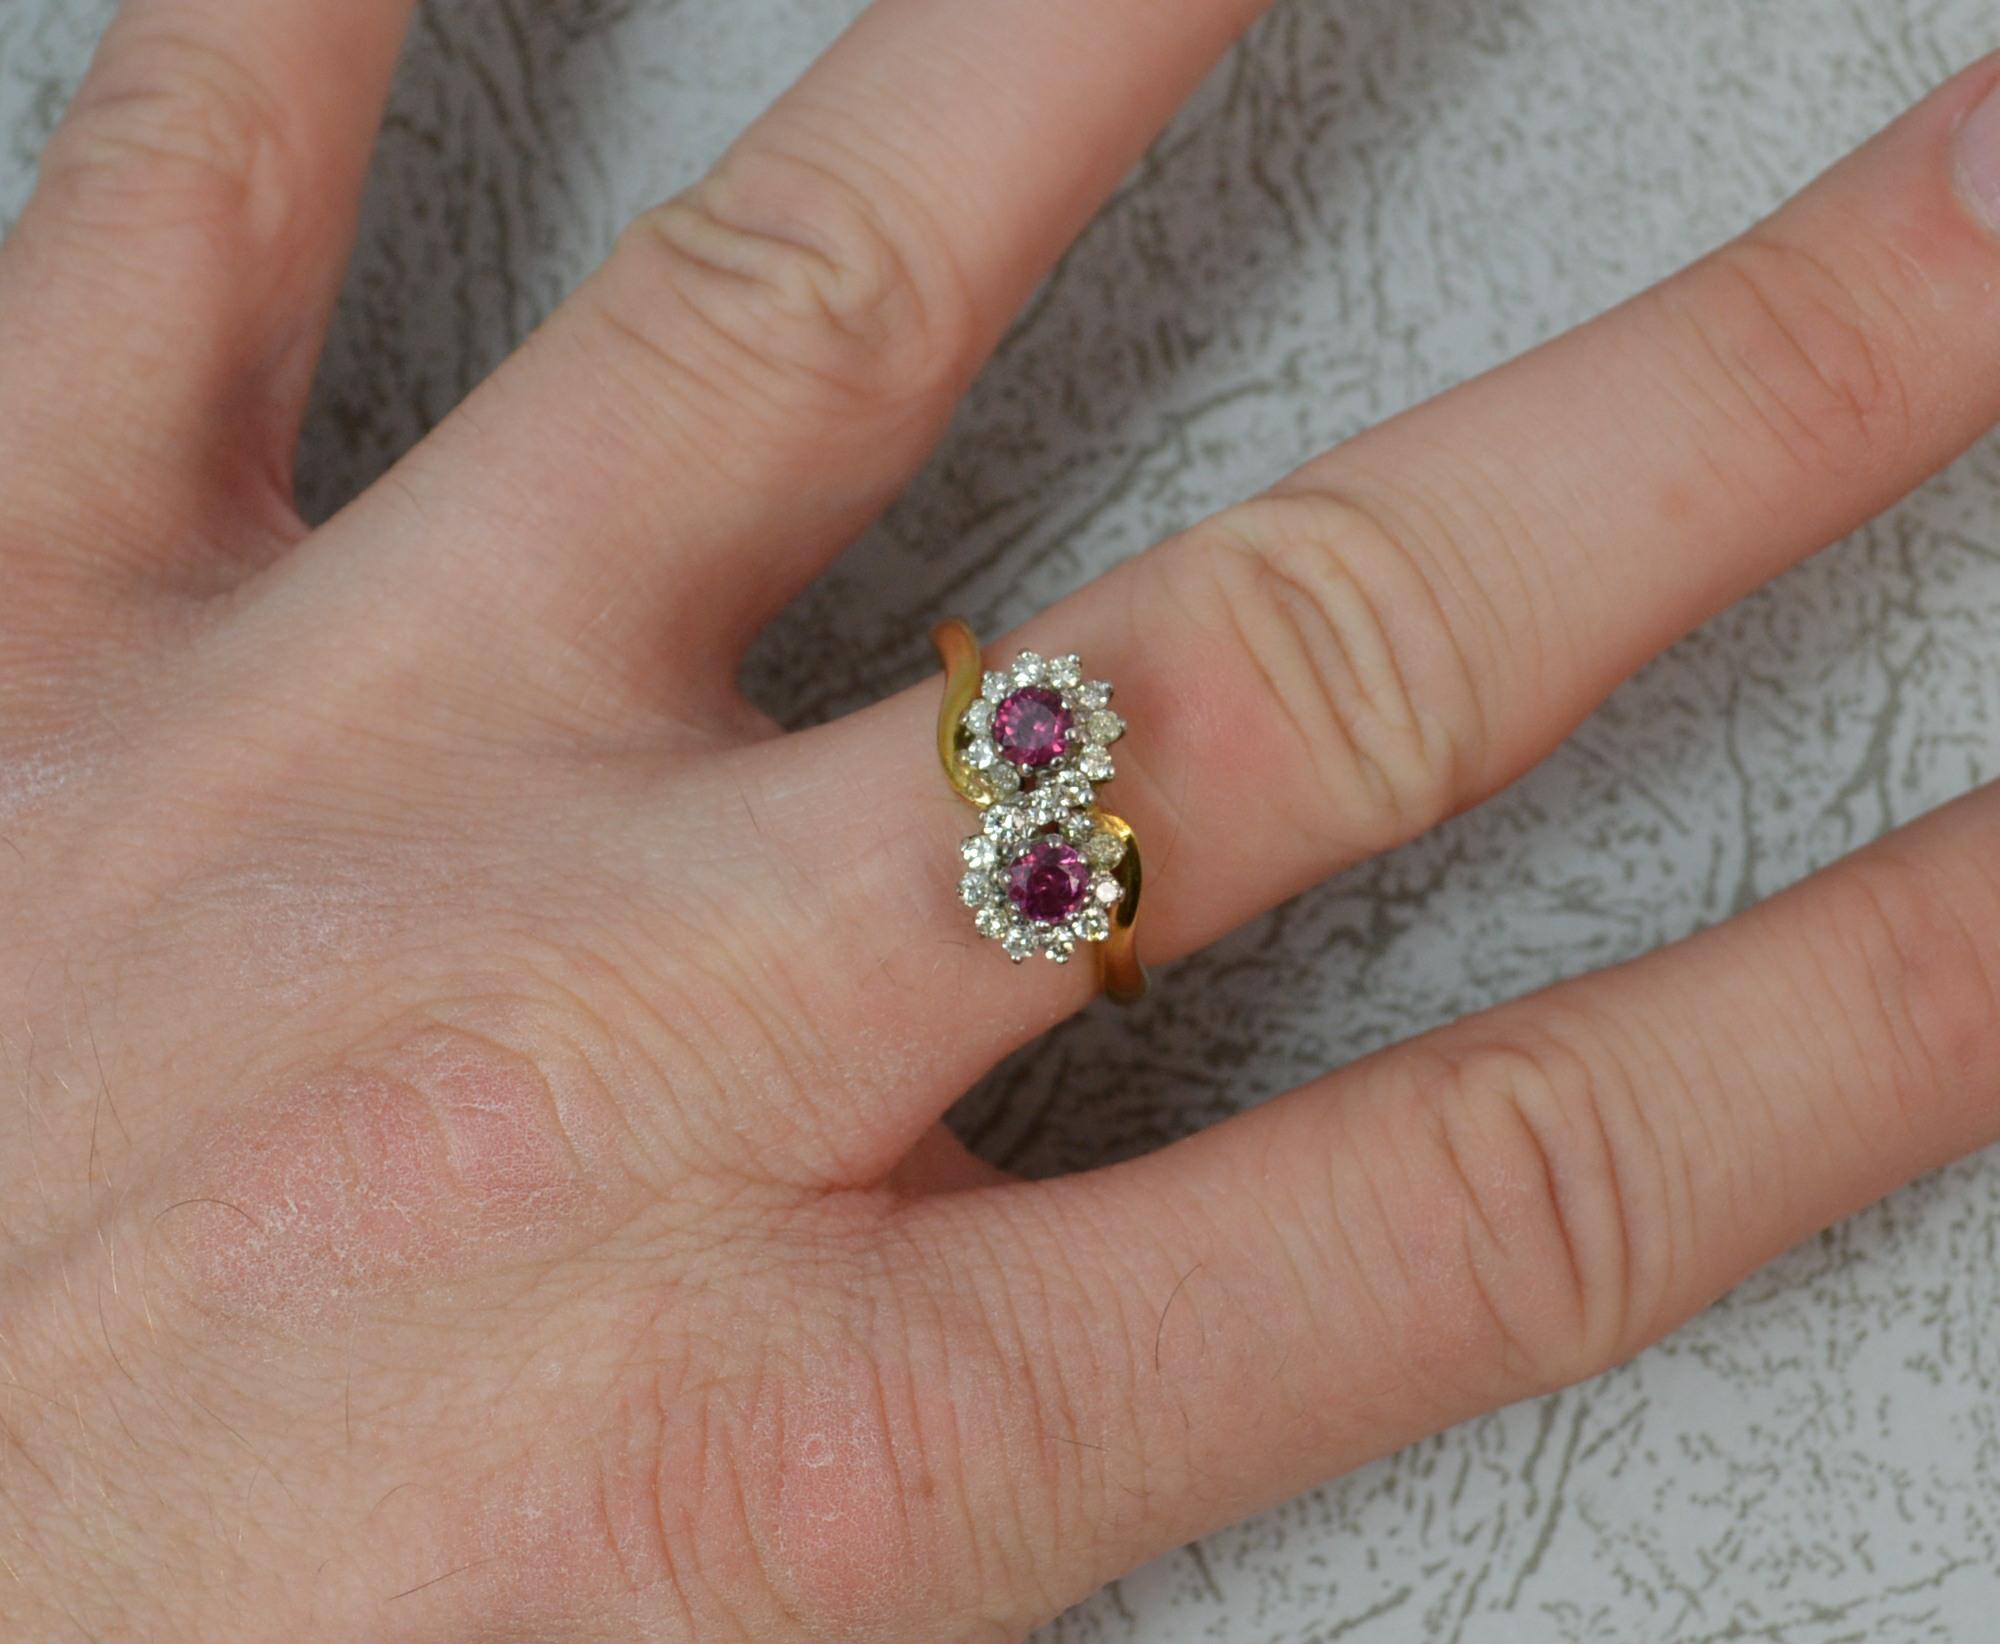 A superb Ruby and Diamond cluster ring in 18ct Gold.

Designed with two round cut pink red natural ruby stones, 3.6mm diameter.

Each surrounded by multiple round cut natural diamonds.

14mm spread of stones, protruding 6.5mm off the finger.

18